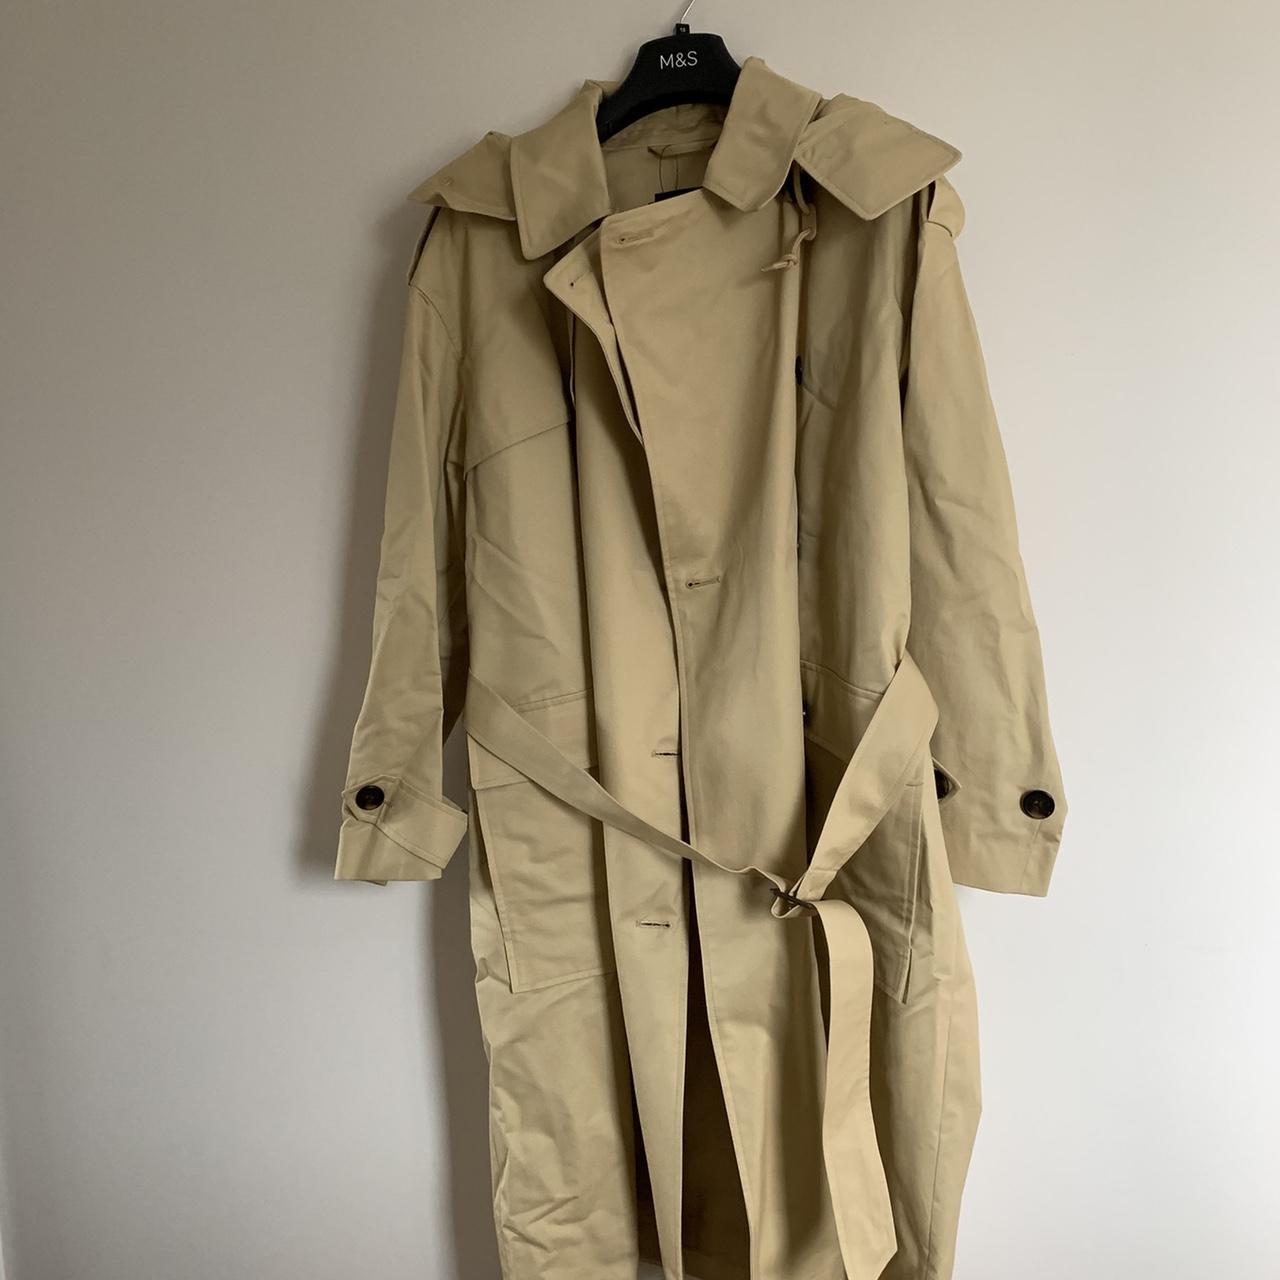 Marks and spencers classic trench coat. SOLD OUT.... - Depop